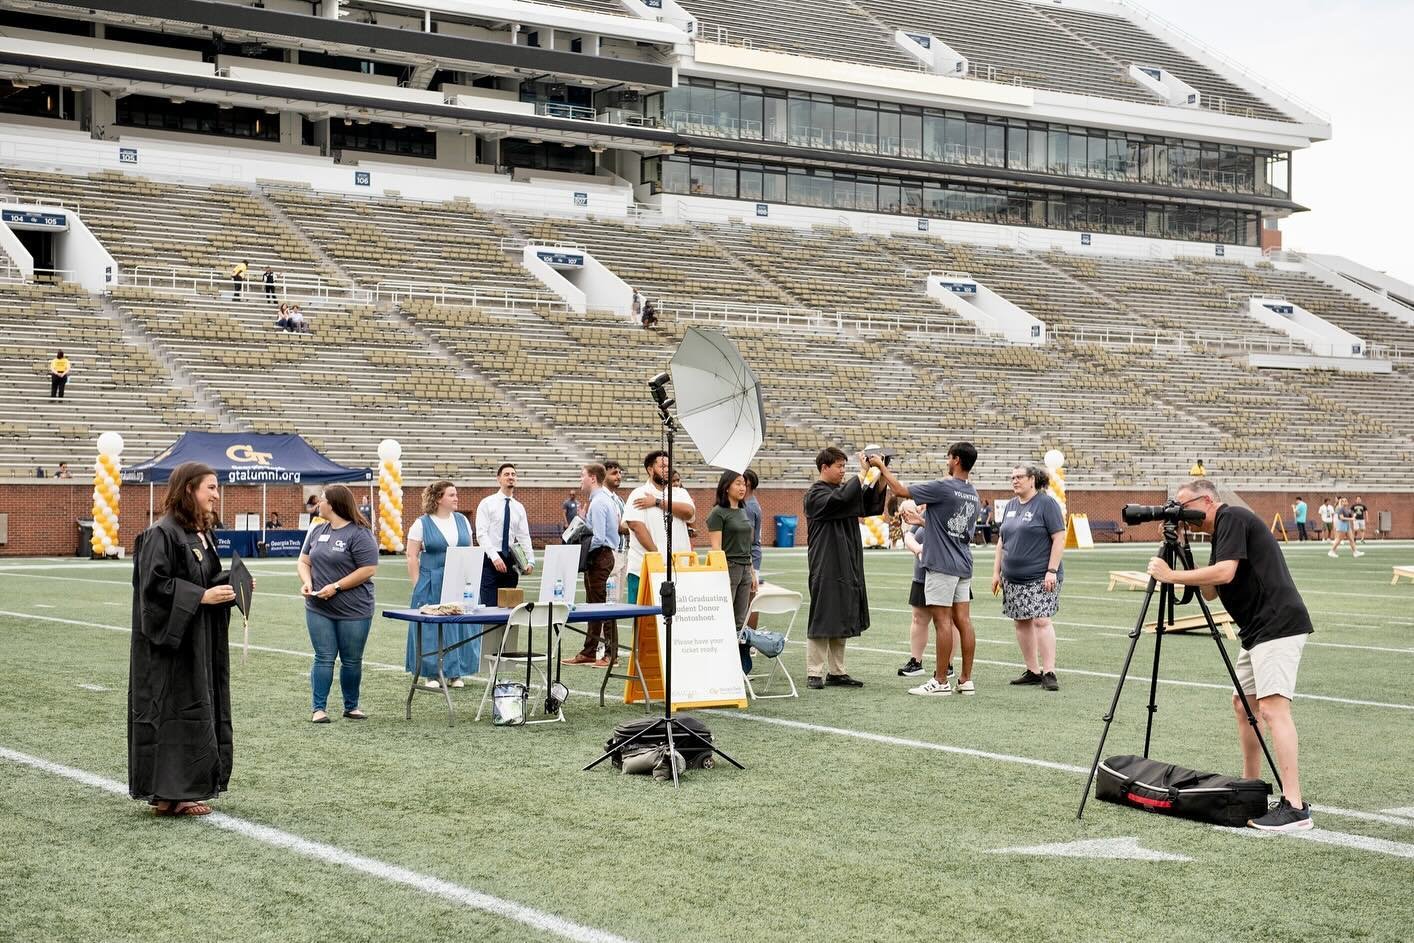 So many events, so many photos!! 
Last week we were on the football field at @georgiatech, taking cap &amp; gown pics of the class of 2024 at the annual Ramblin&rsquo; On party. The evening concluded with attendees taking in a grand fireworks display